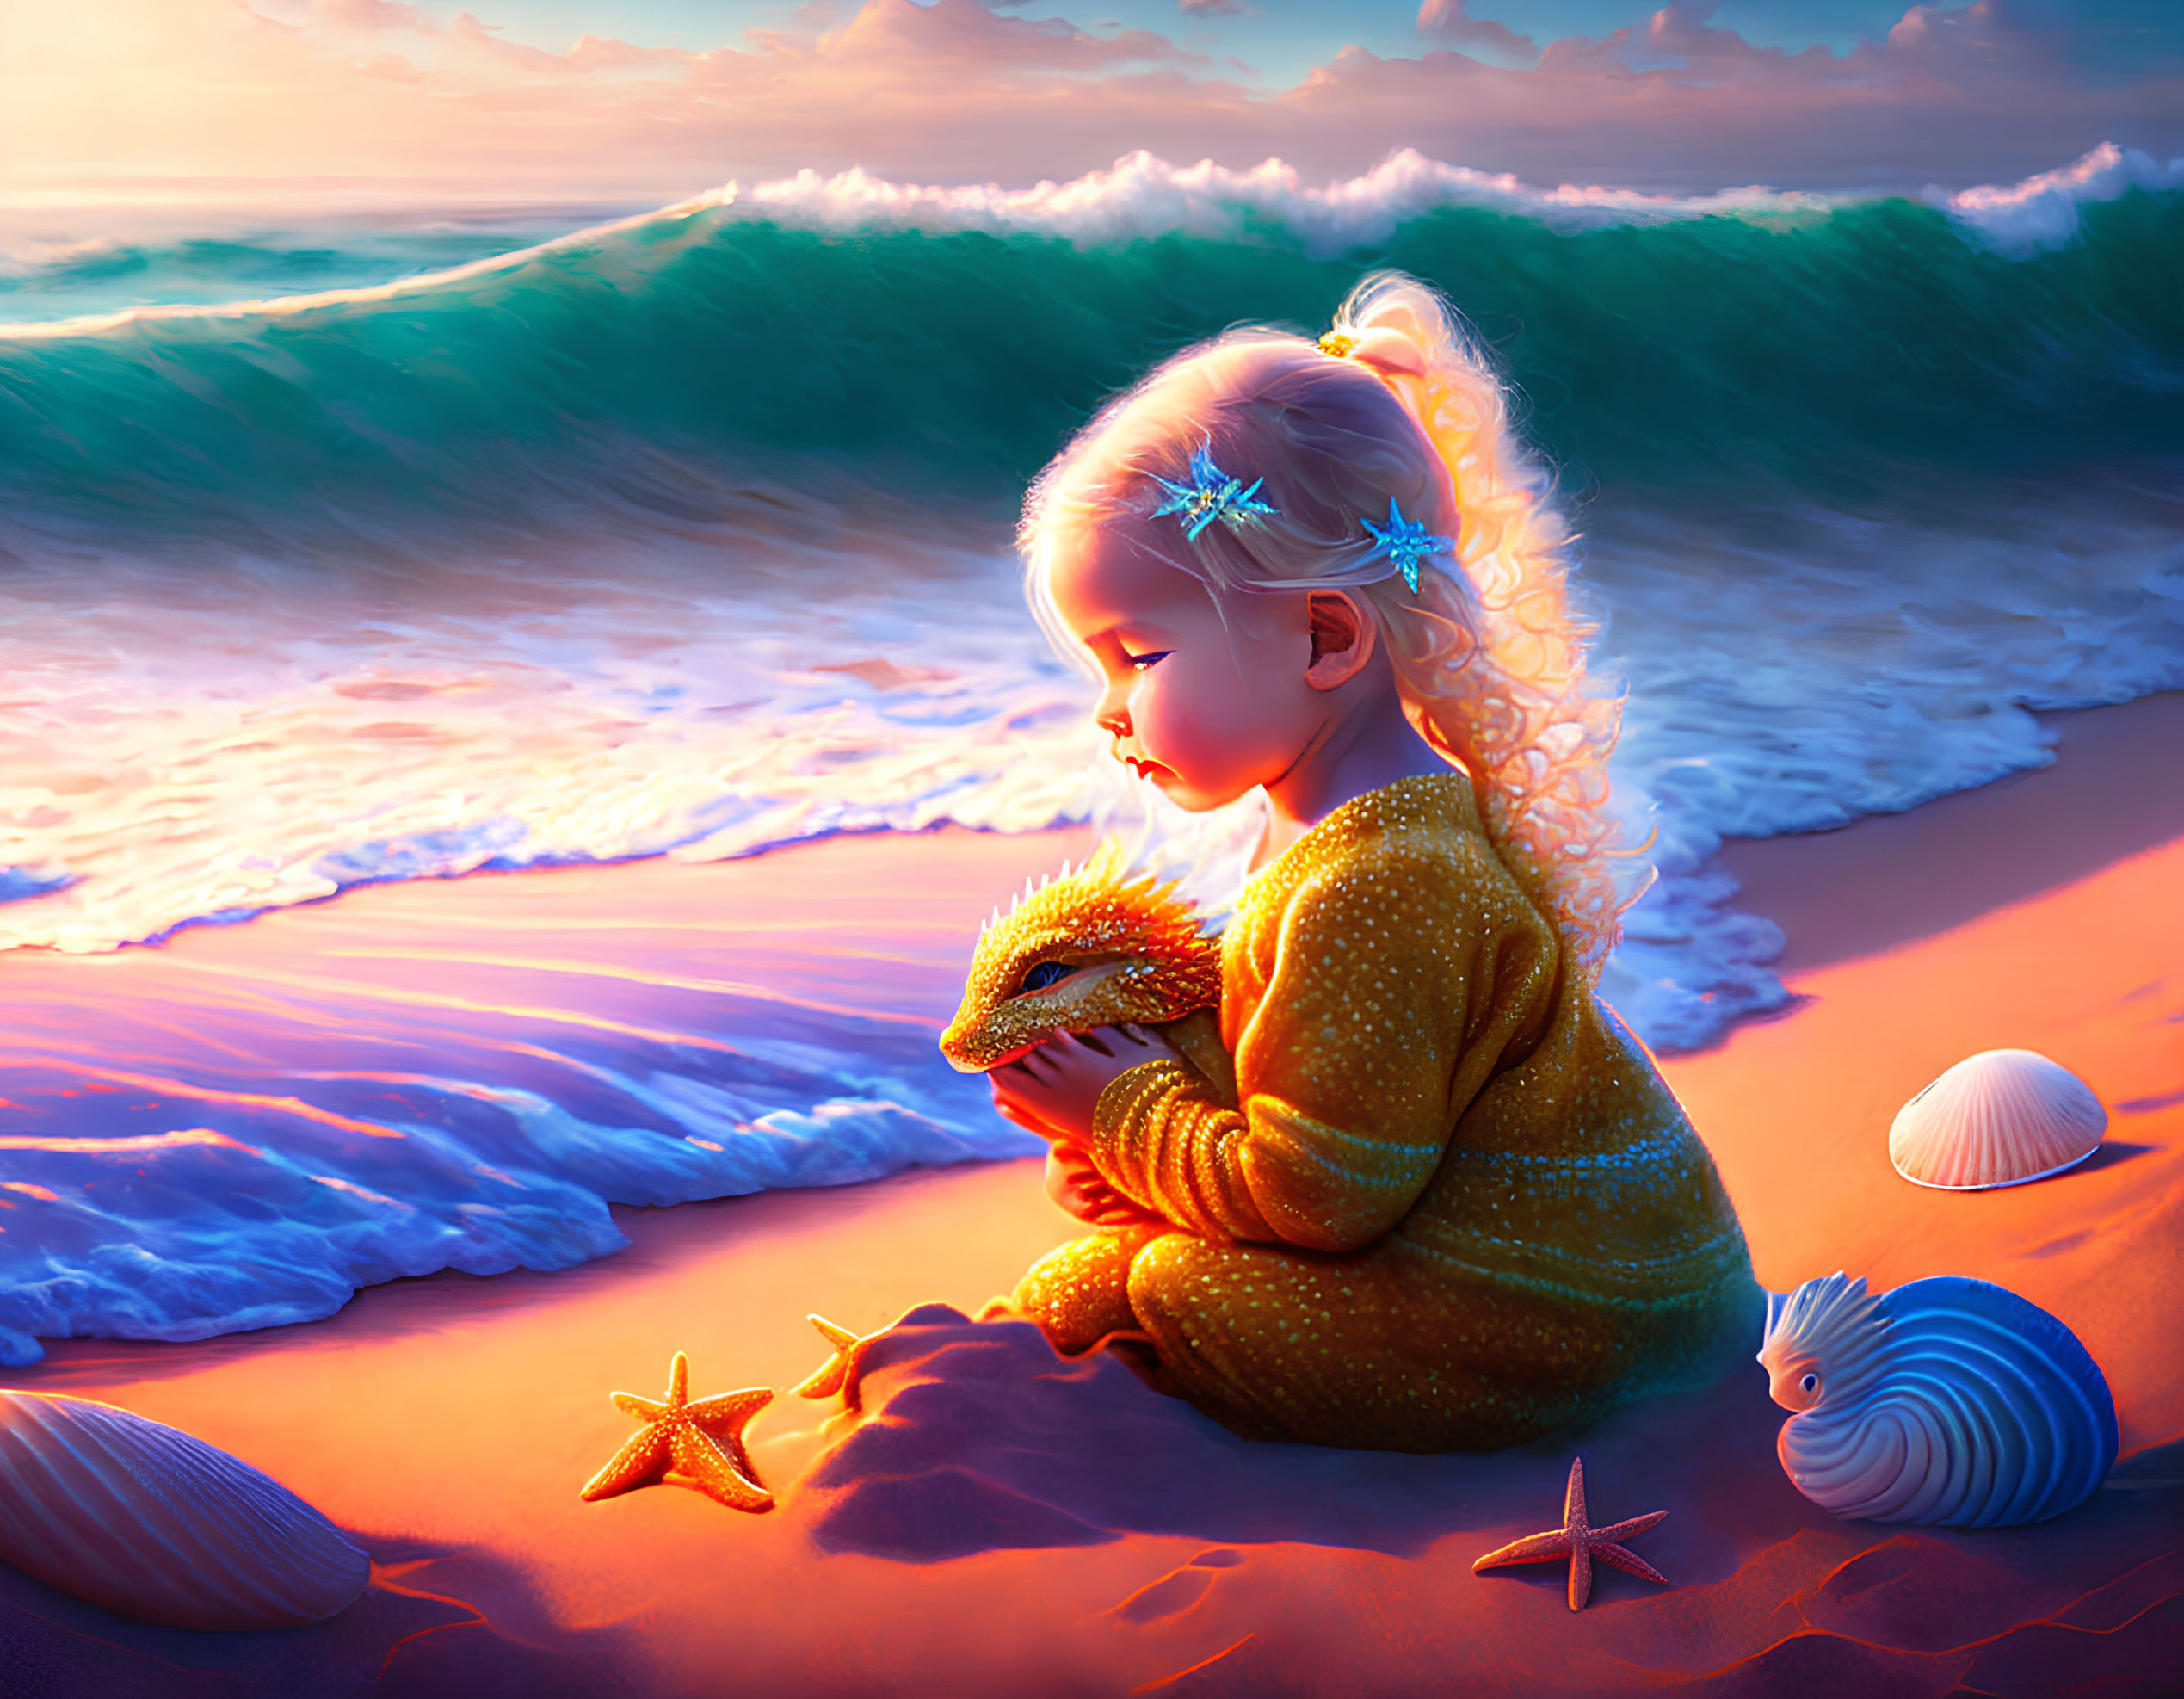 Young girl in cozy sweater holding hedgehog on beach at sunset with starfish, seashells,